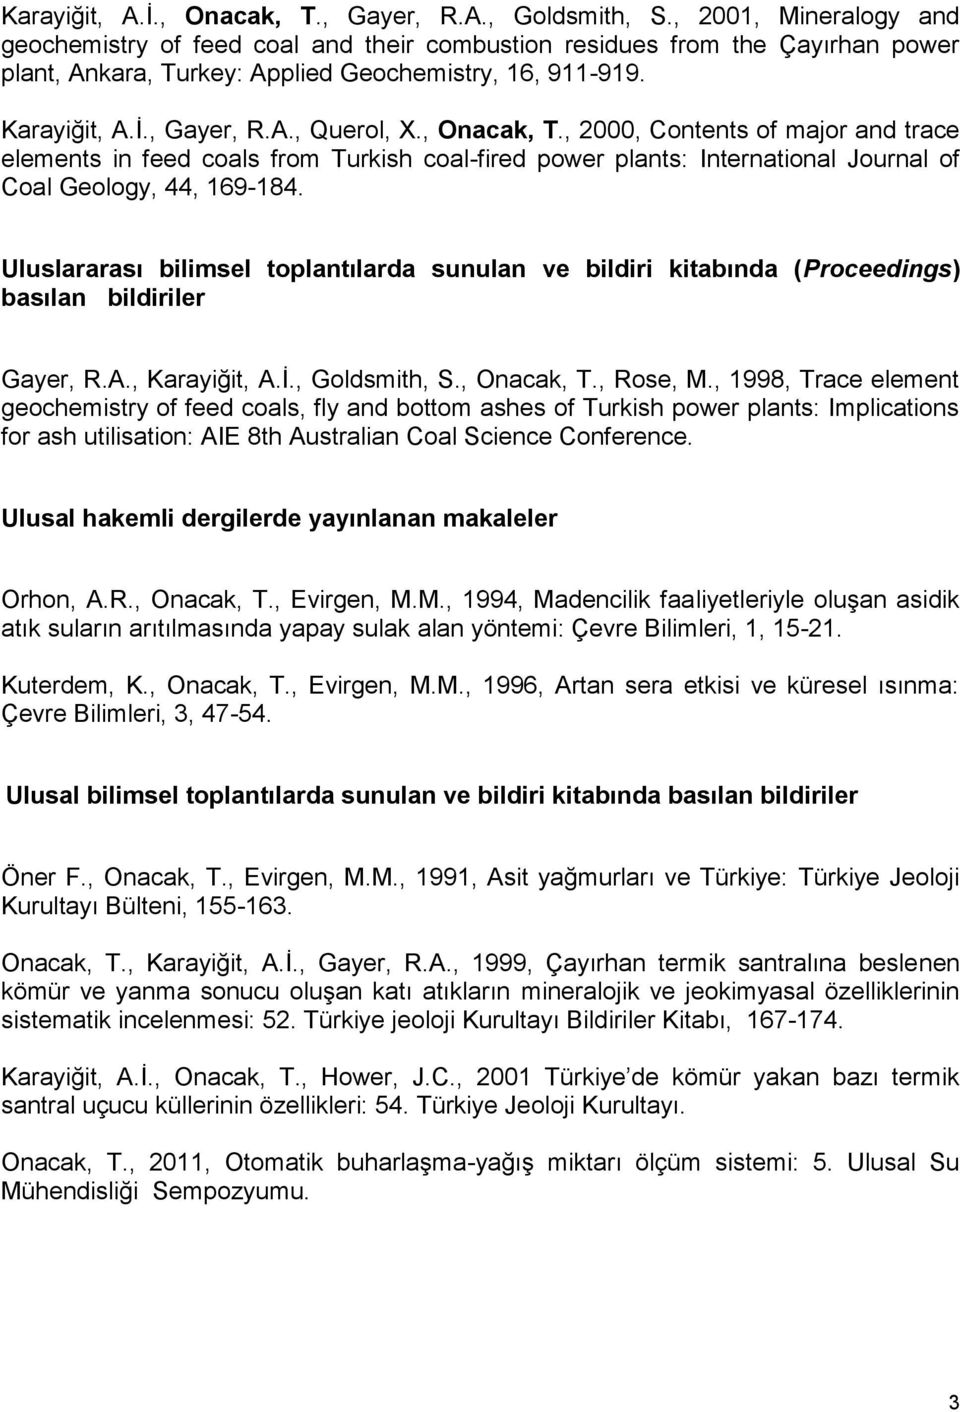 , Onacak, T., 2000, Contents of major and trace elements in feed coals from Turkish coal-fired power plants: International Journal of Coal Geology, 44, 169-184.